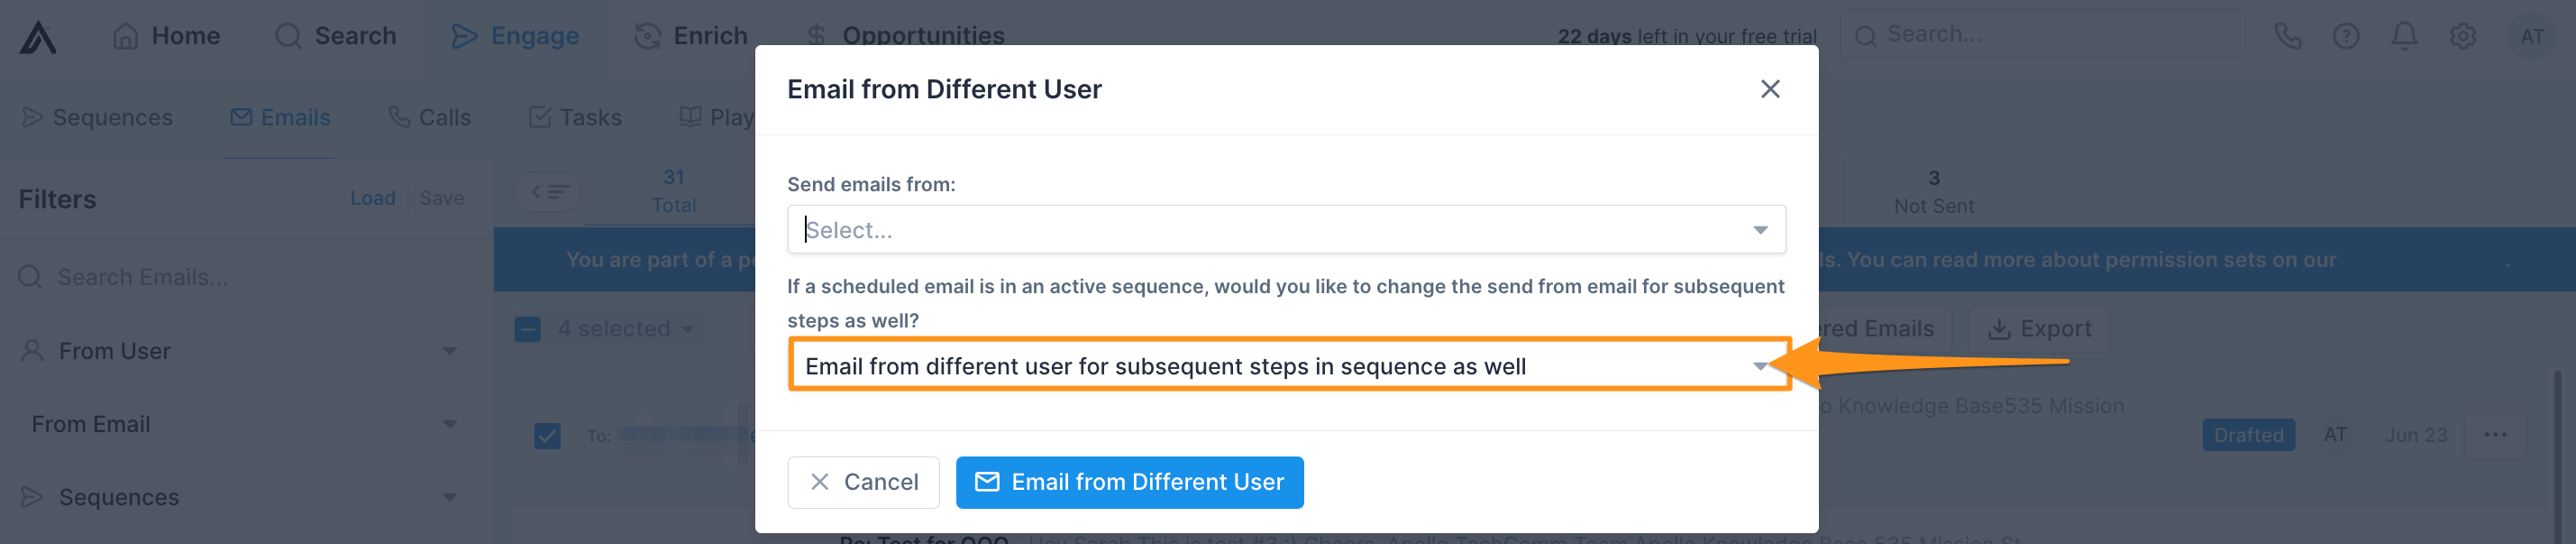 Change Send from Email for Subsequent Sequence Steps Drop-Down